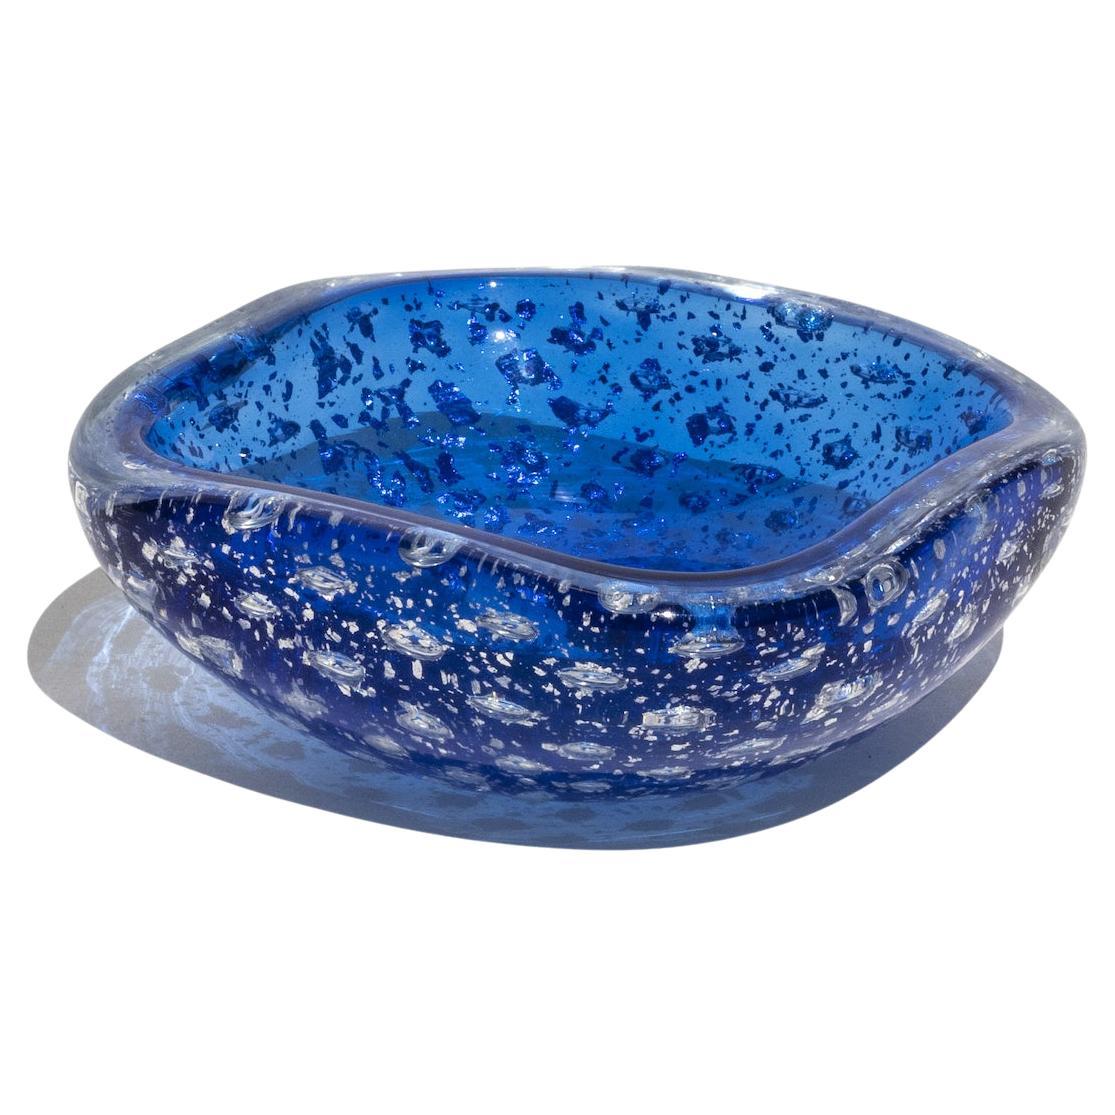 Vintage Italian Bowl from the 60s in Blue Murano Glass with Silver Metal Flakes